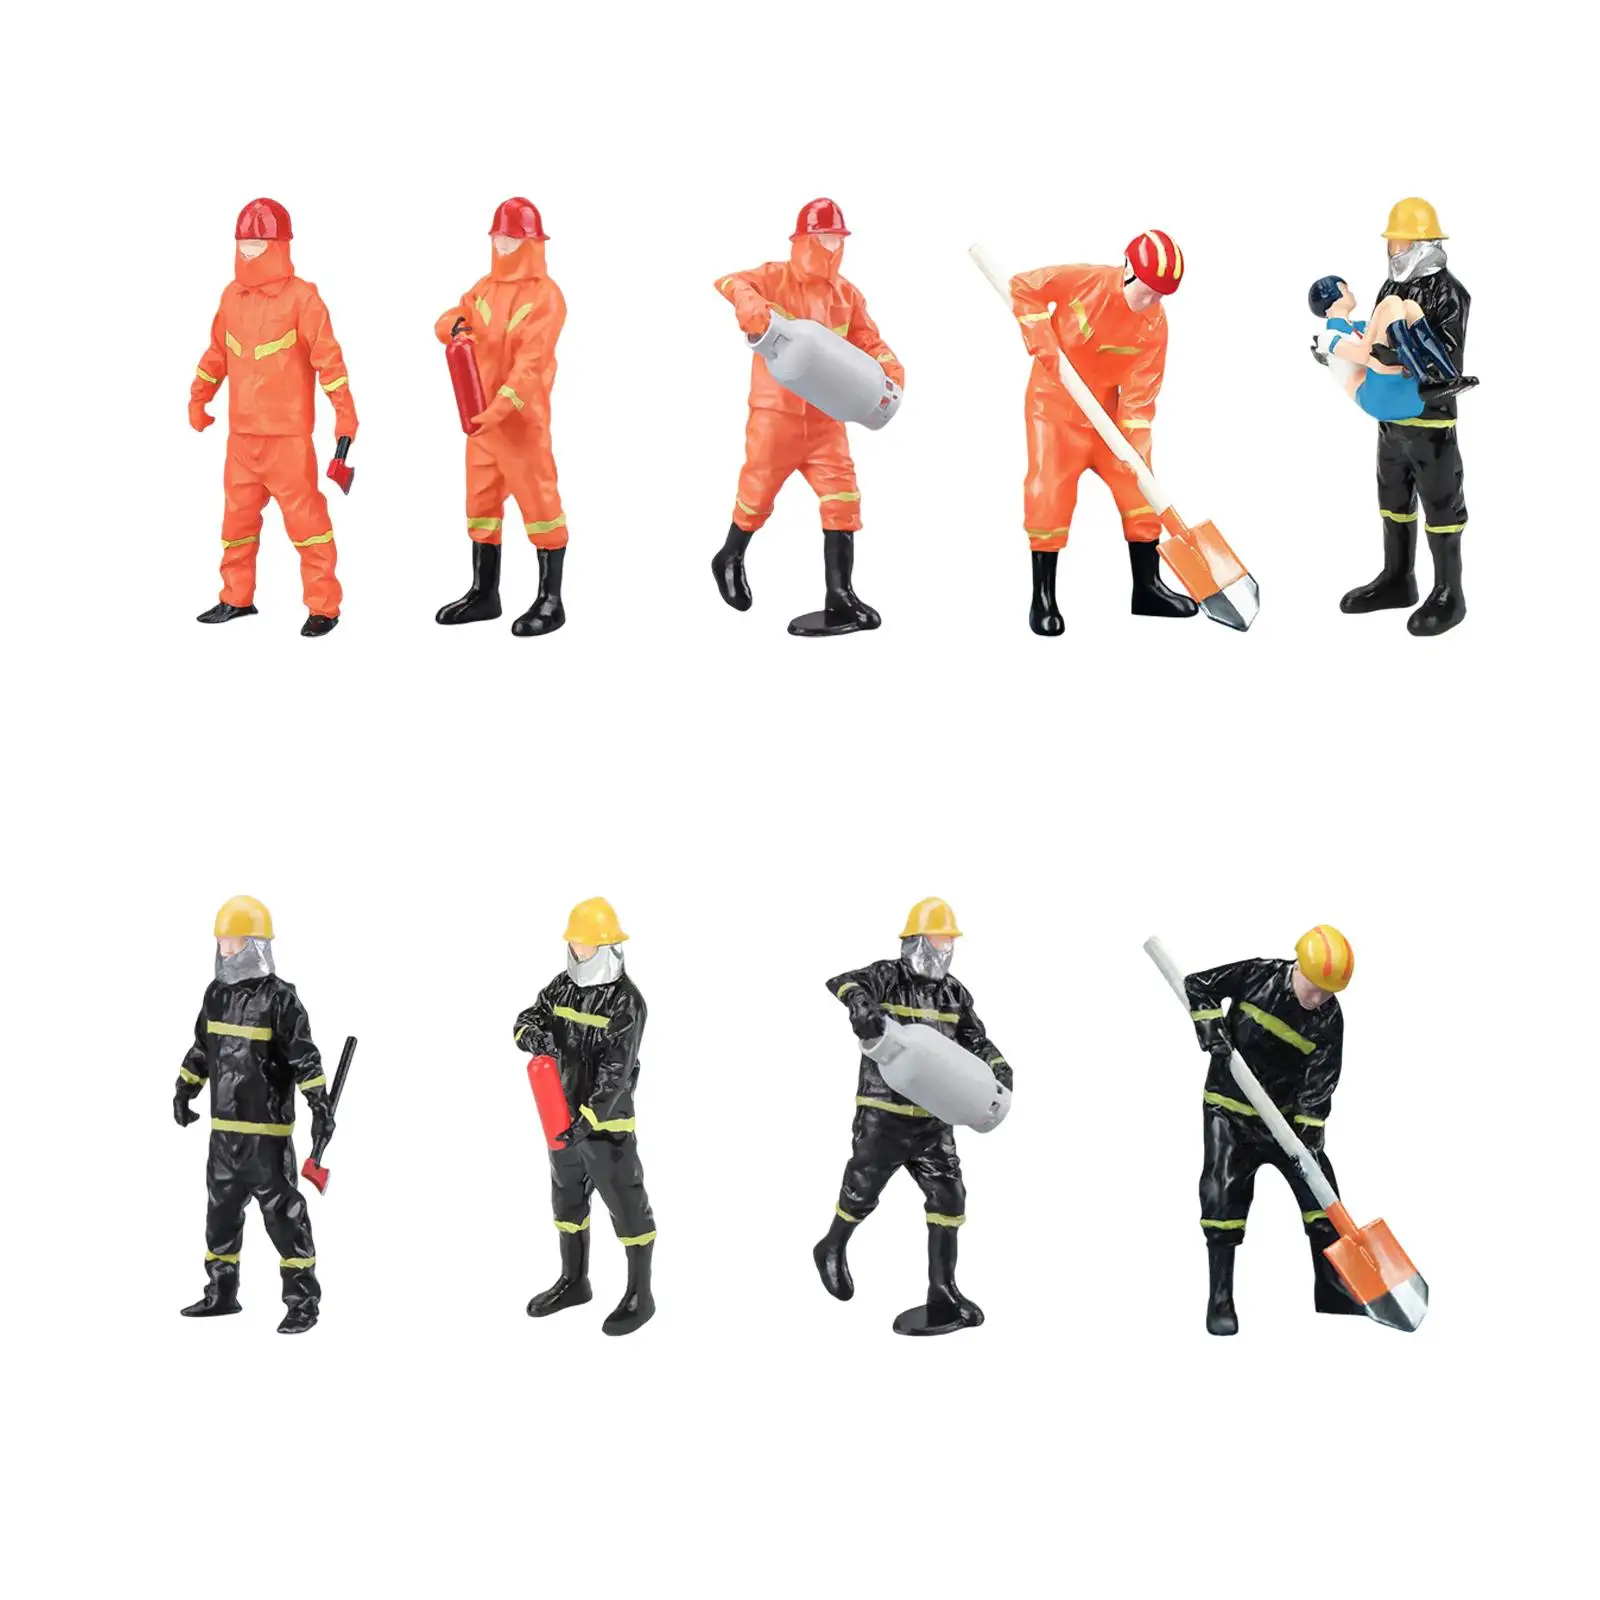 Simulation 1/32 Models People Figures Ornament Tiny People Firefighter Figures for DIY Projects, Photography Props